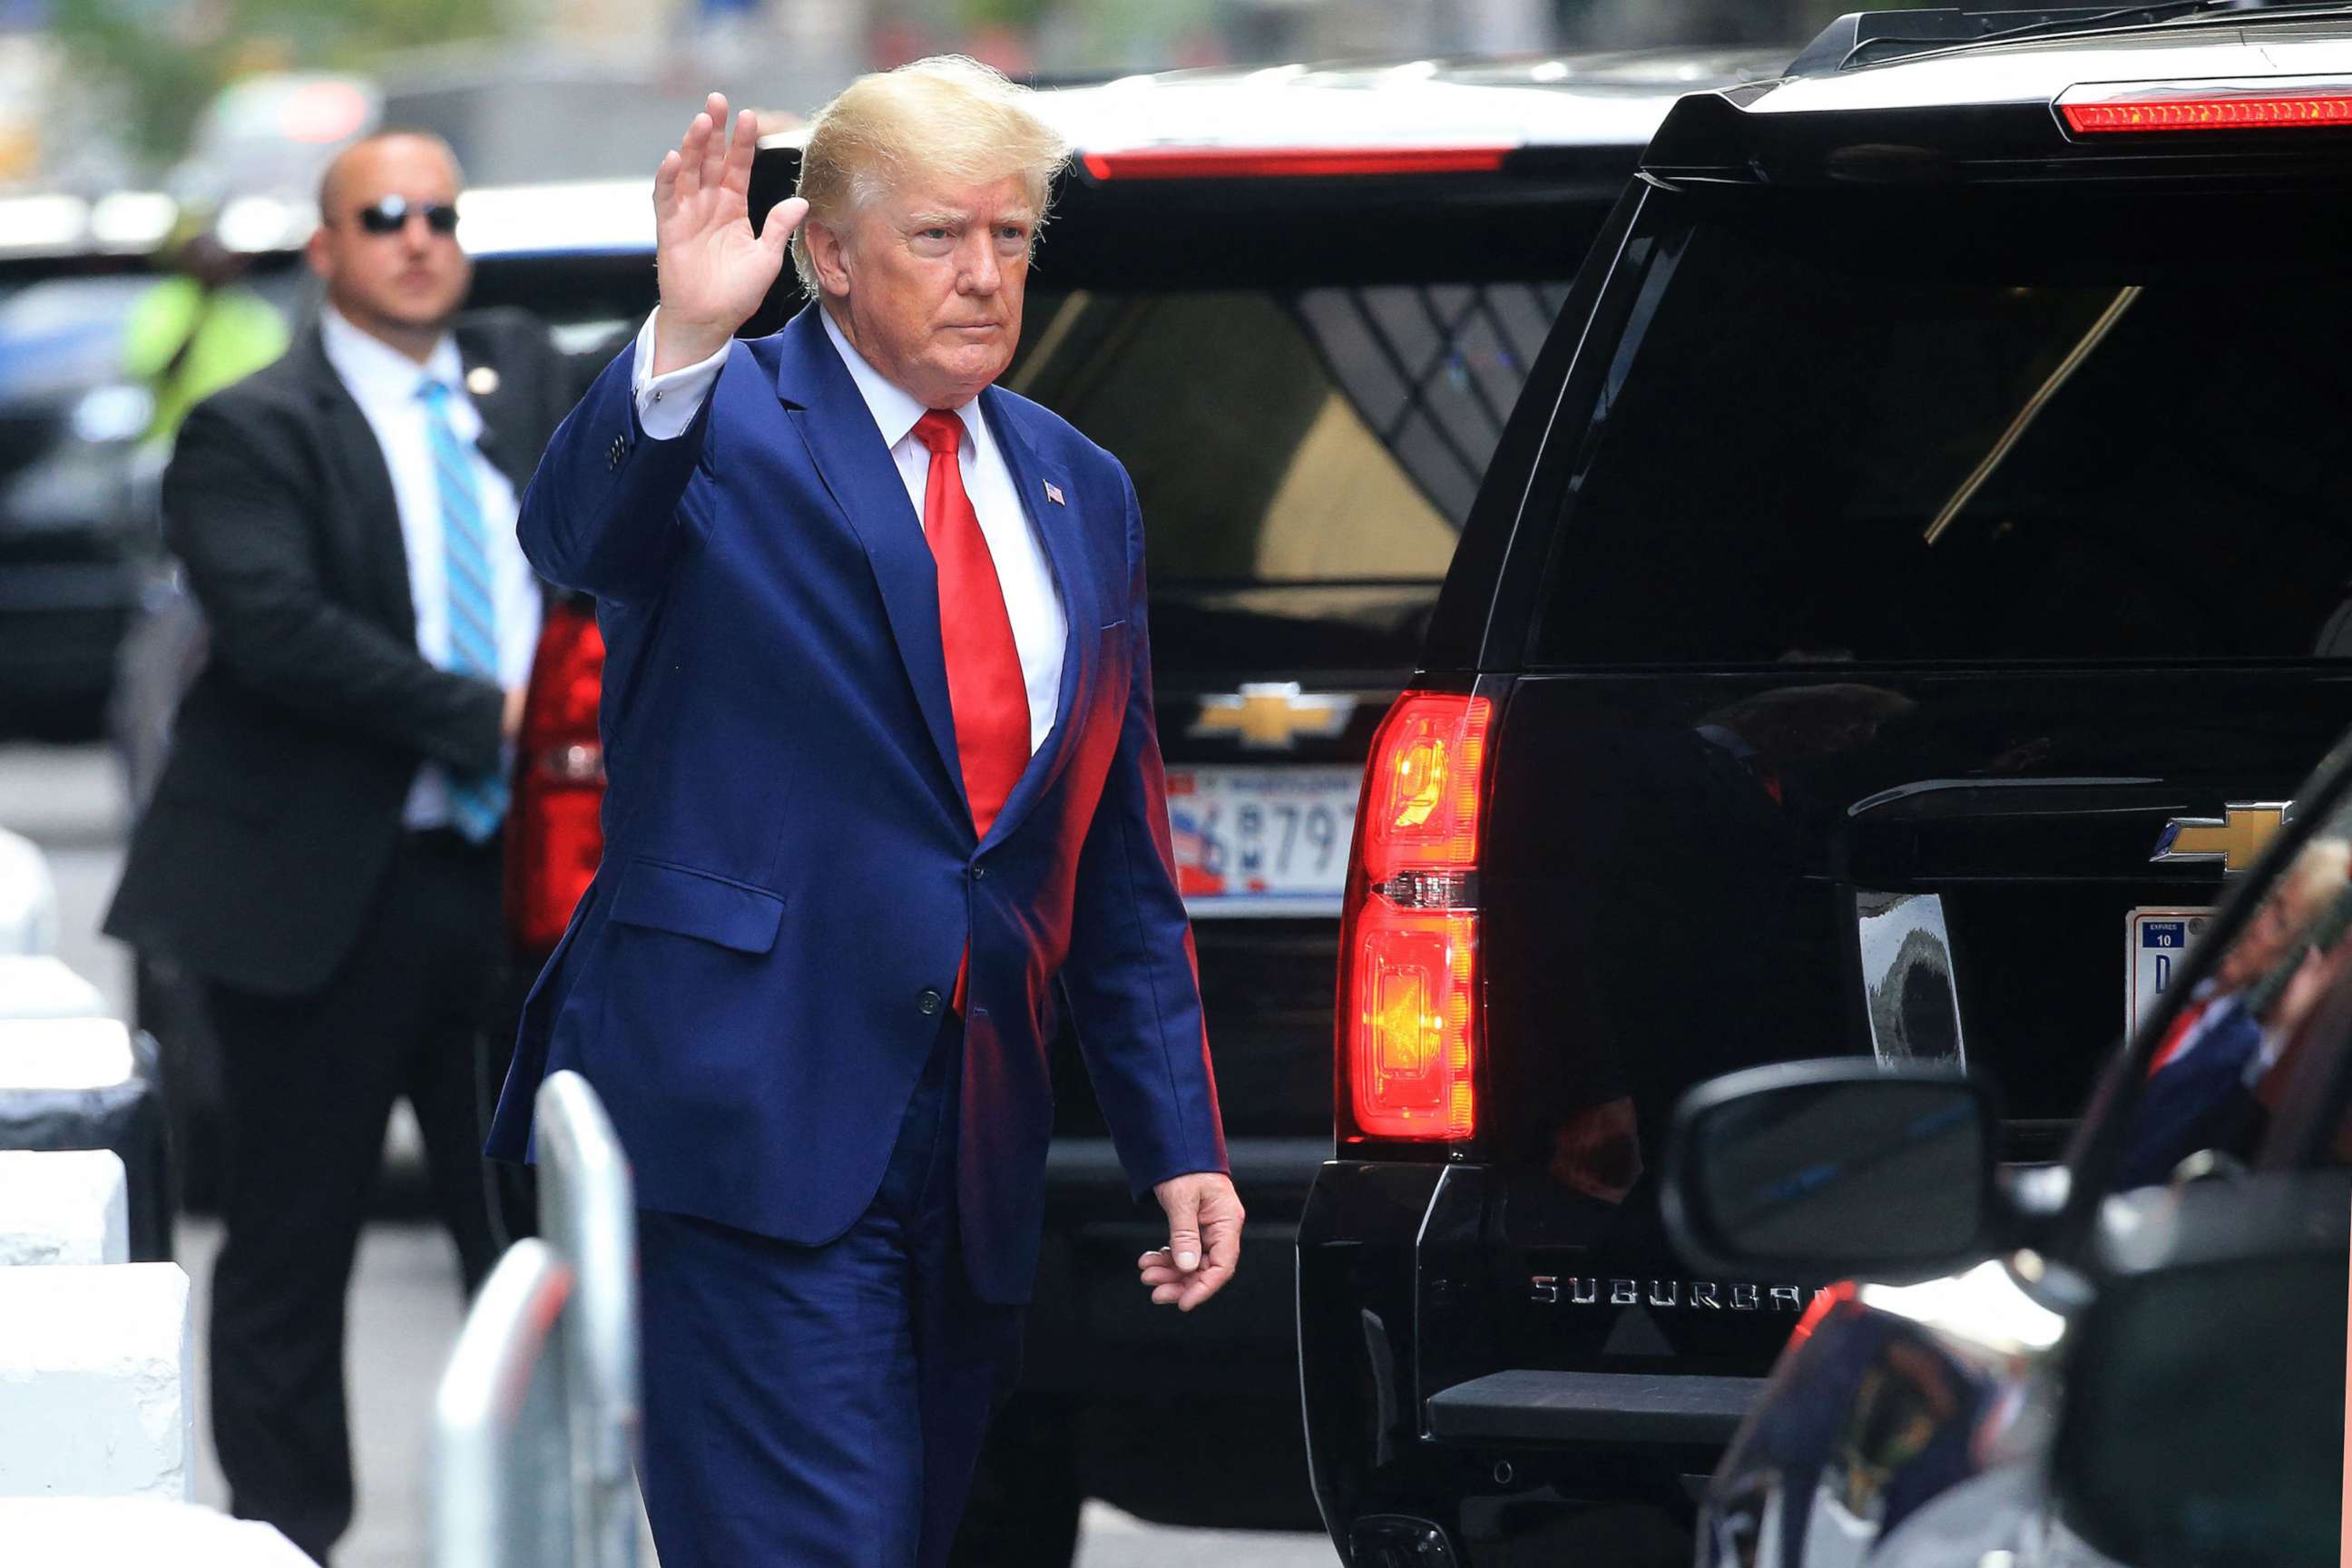 PHOTO: Former President Donald Trump waves while walking to a vehicle in New York, on Aug. 10, 2022.